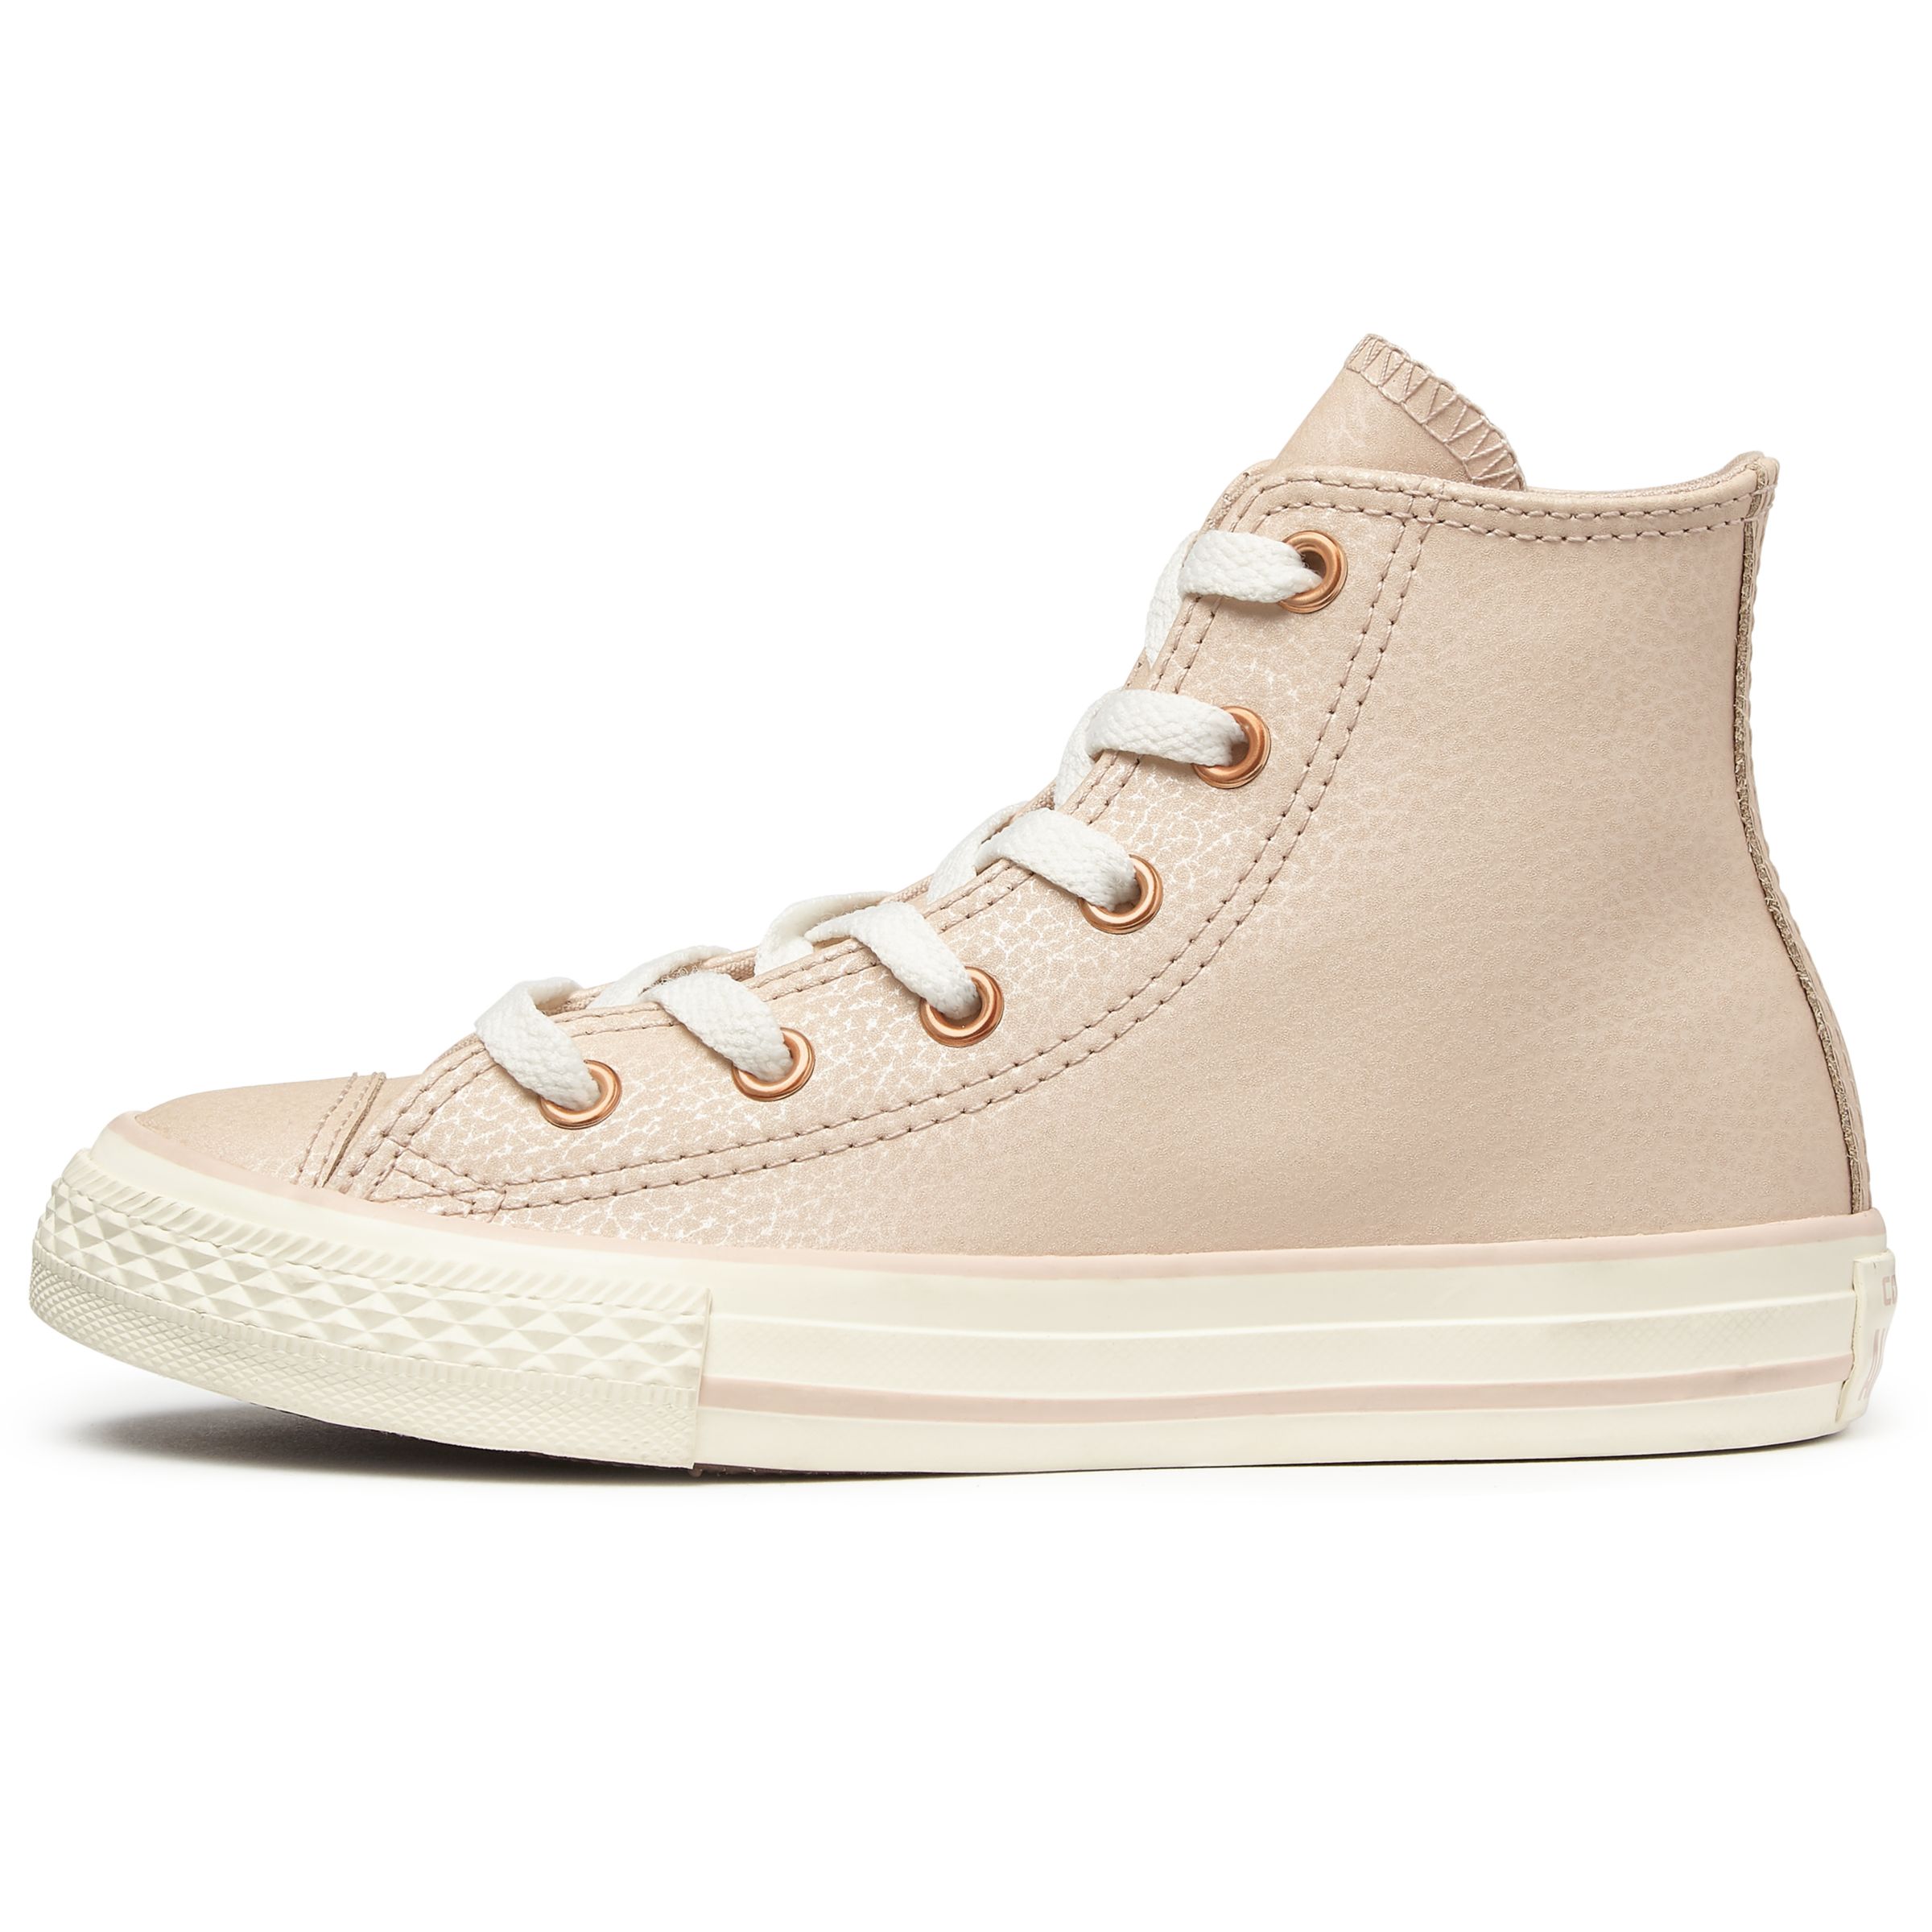 Converse Chuck Taylor All Star Hi-Top Trainers, Pink, 2